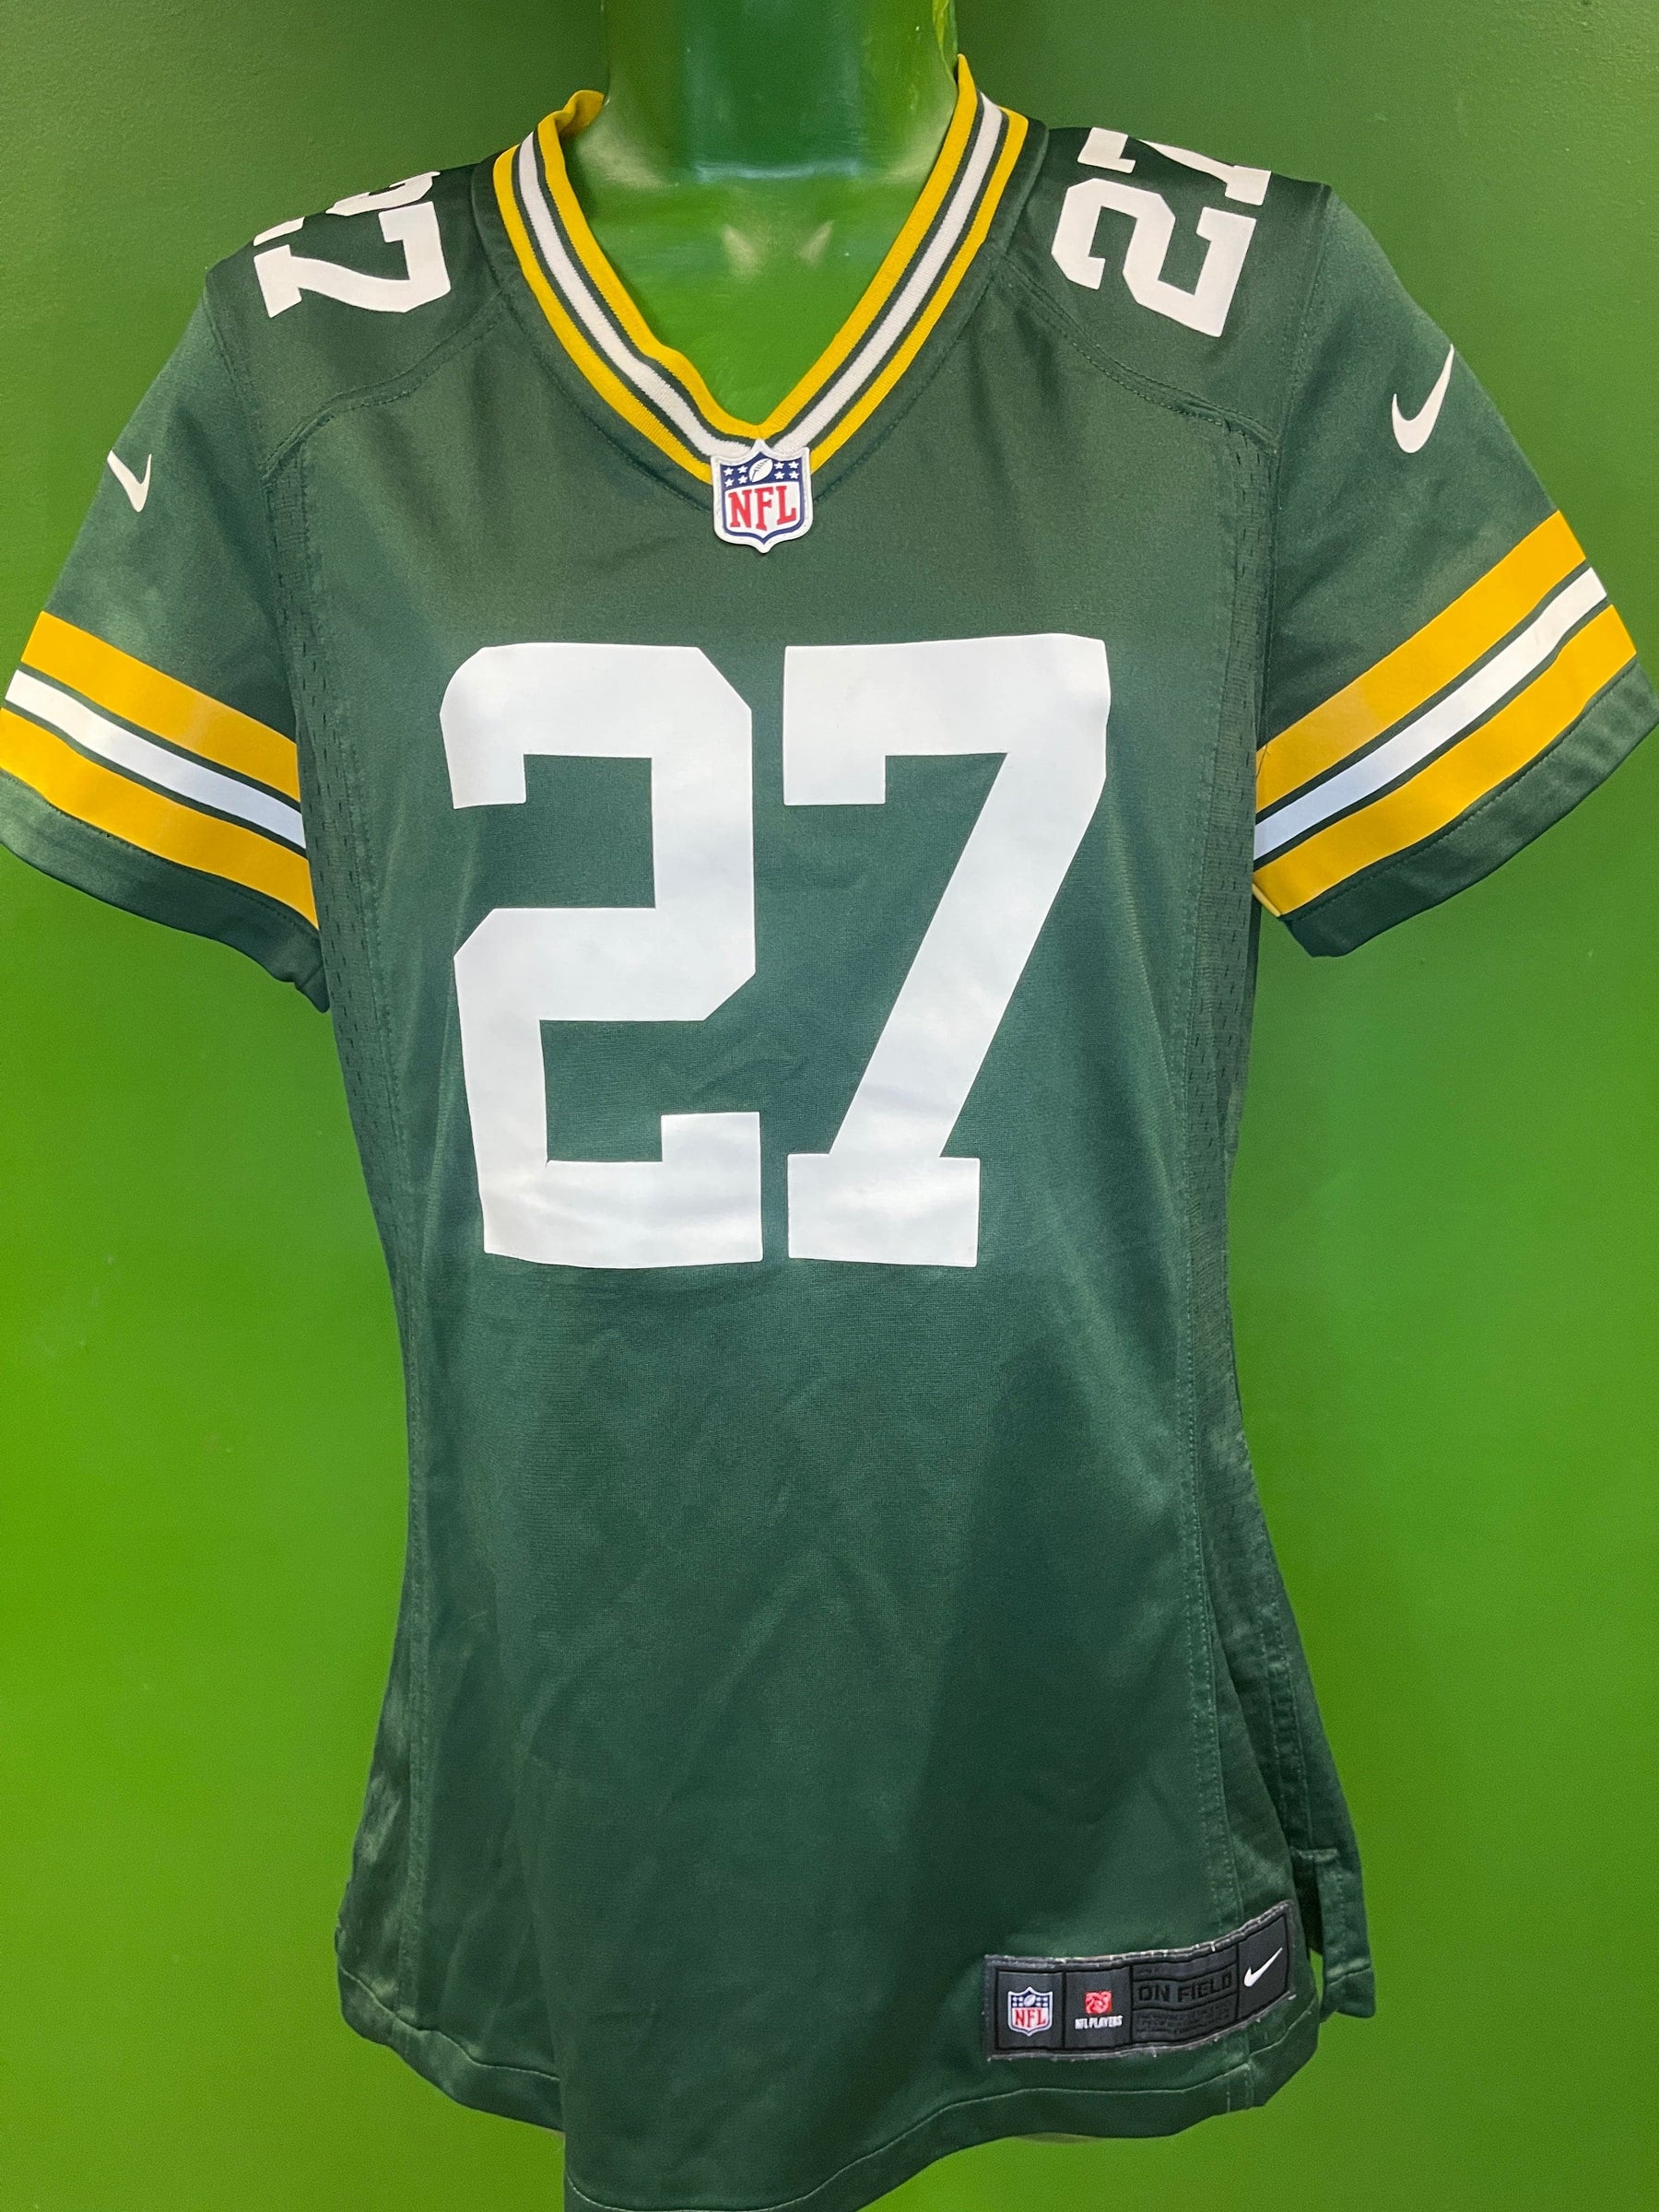 NFL Green Bay Packers Eddie Lacy #27 Green Jersey Women's Small